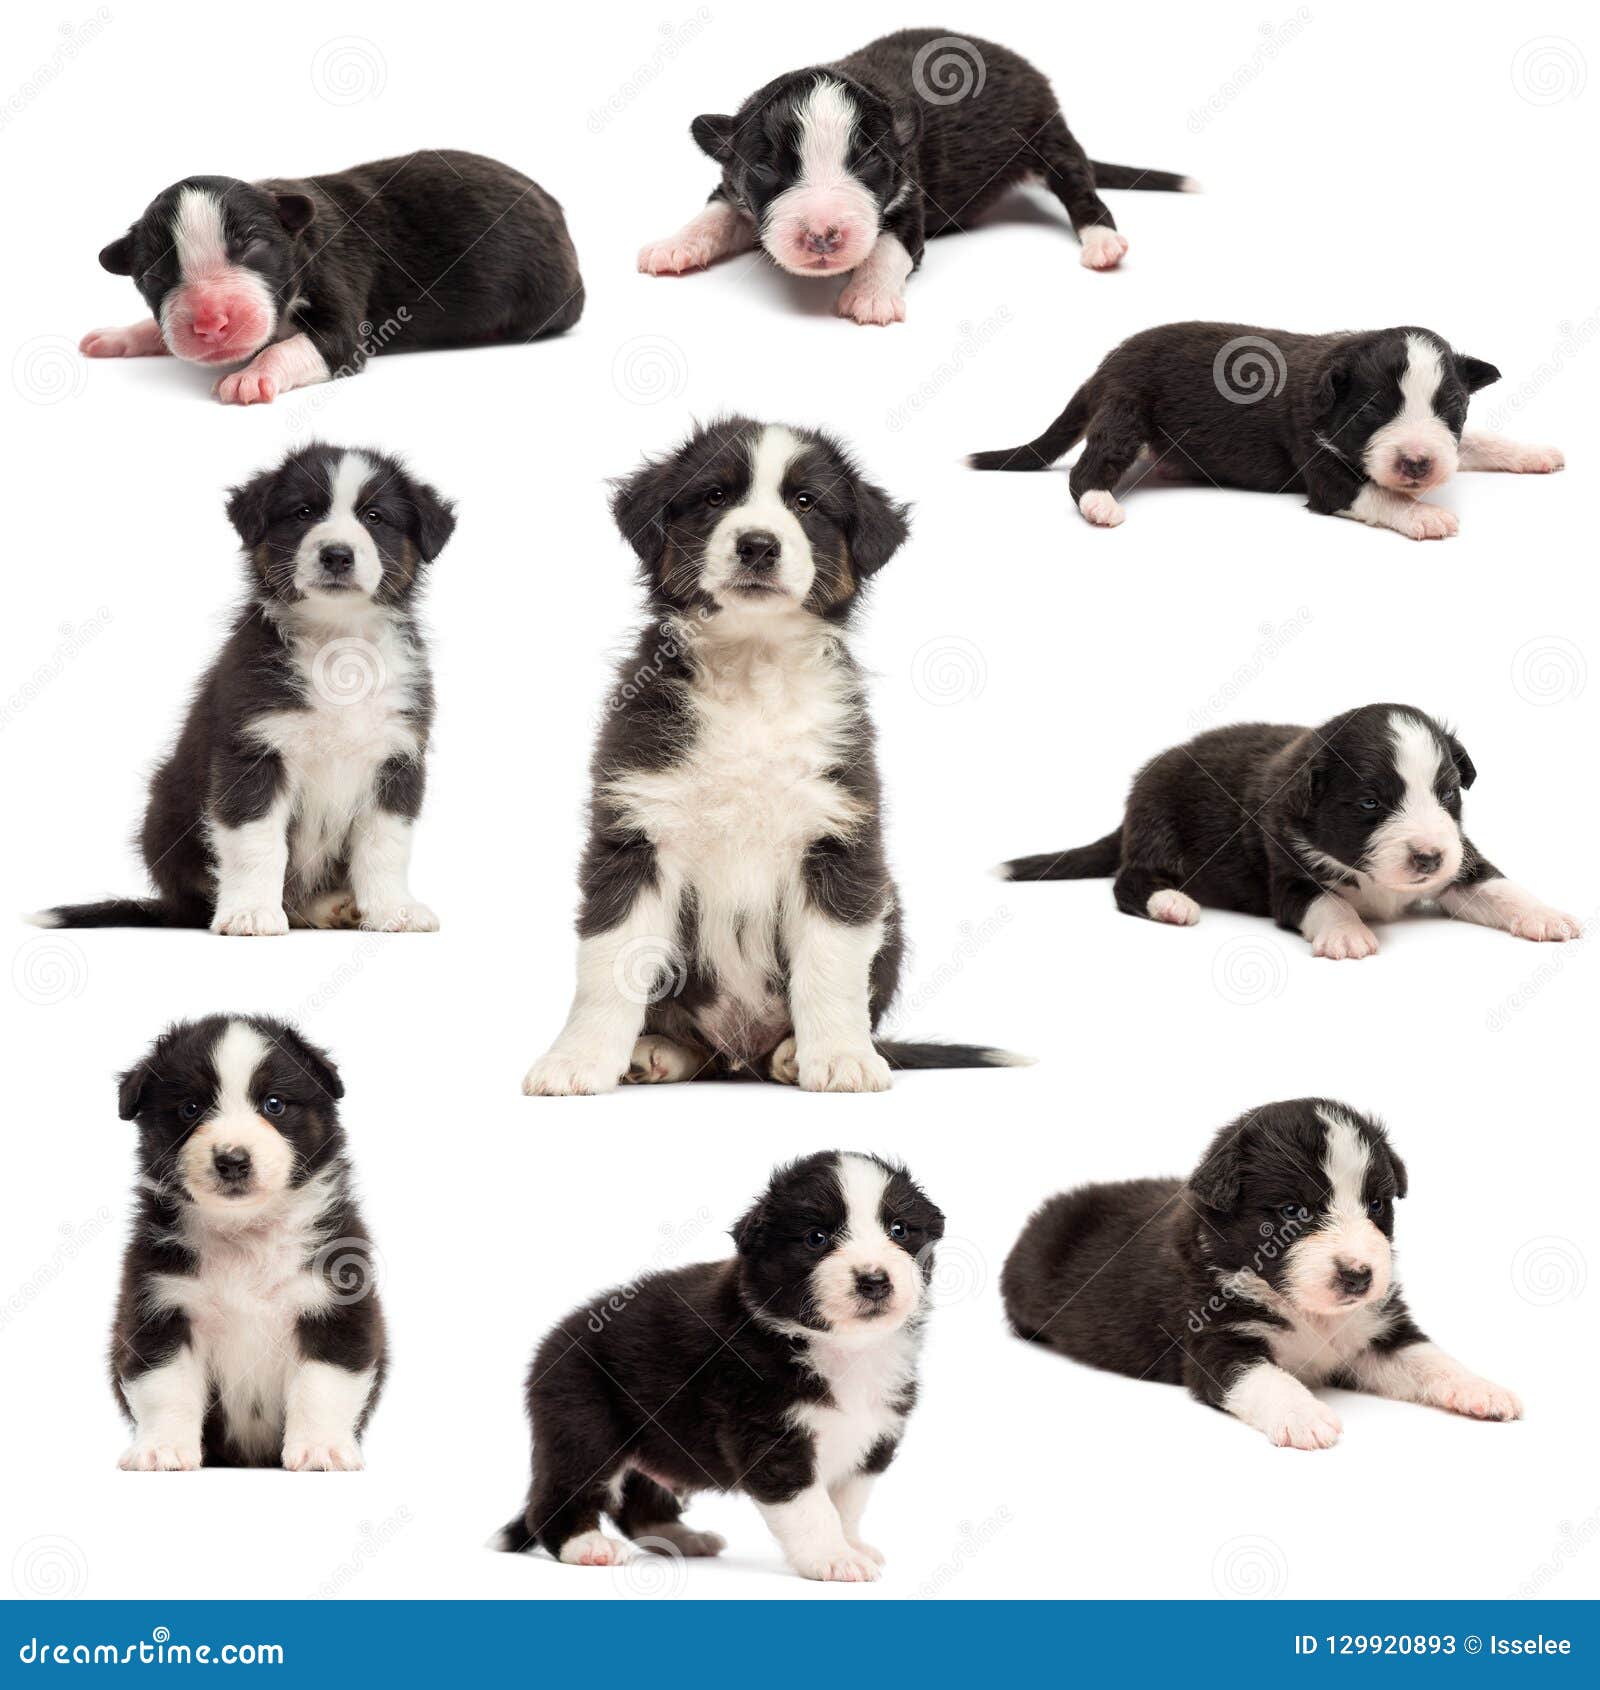 Evolution Of An Australian Shepherd Puppy 1 Days To 2 Months Old Stock Image Image Of Animal People